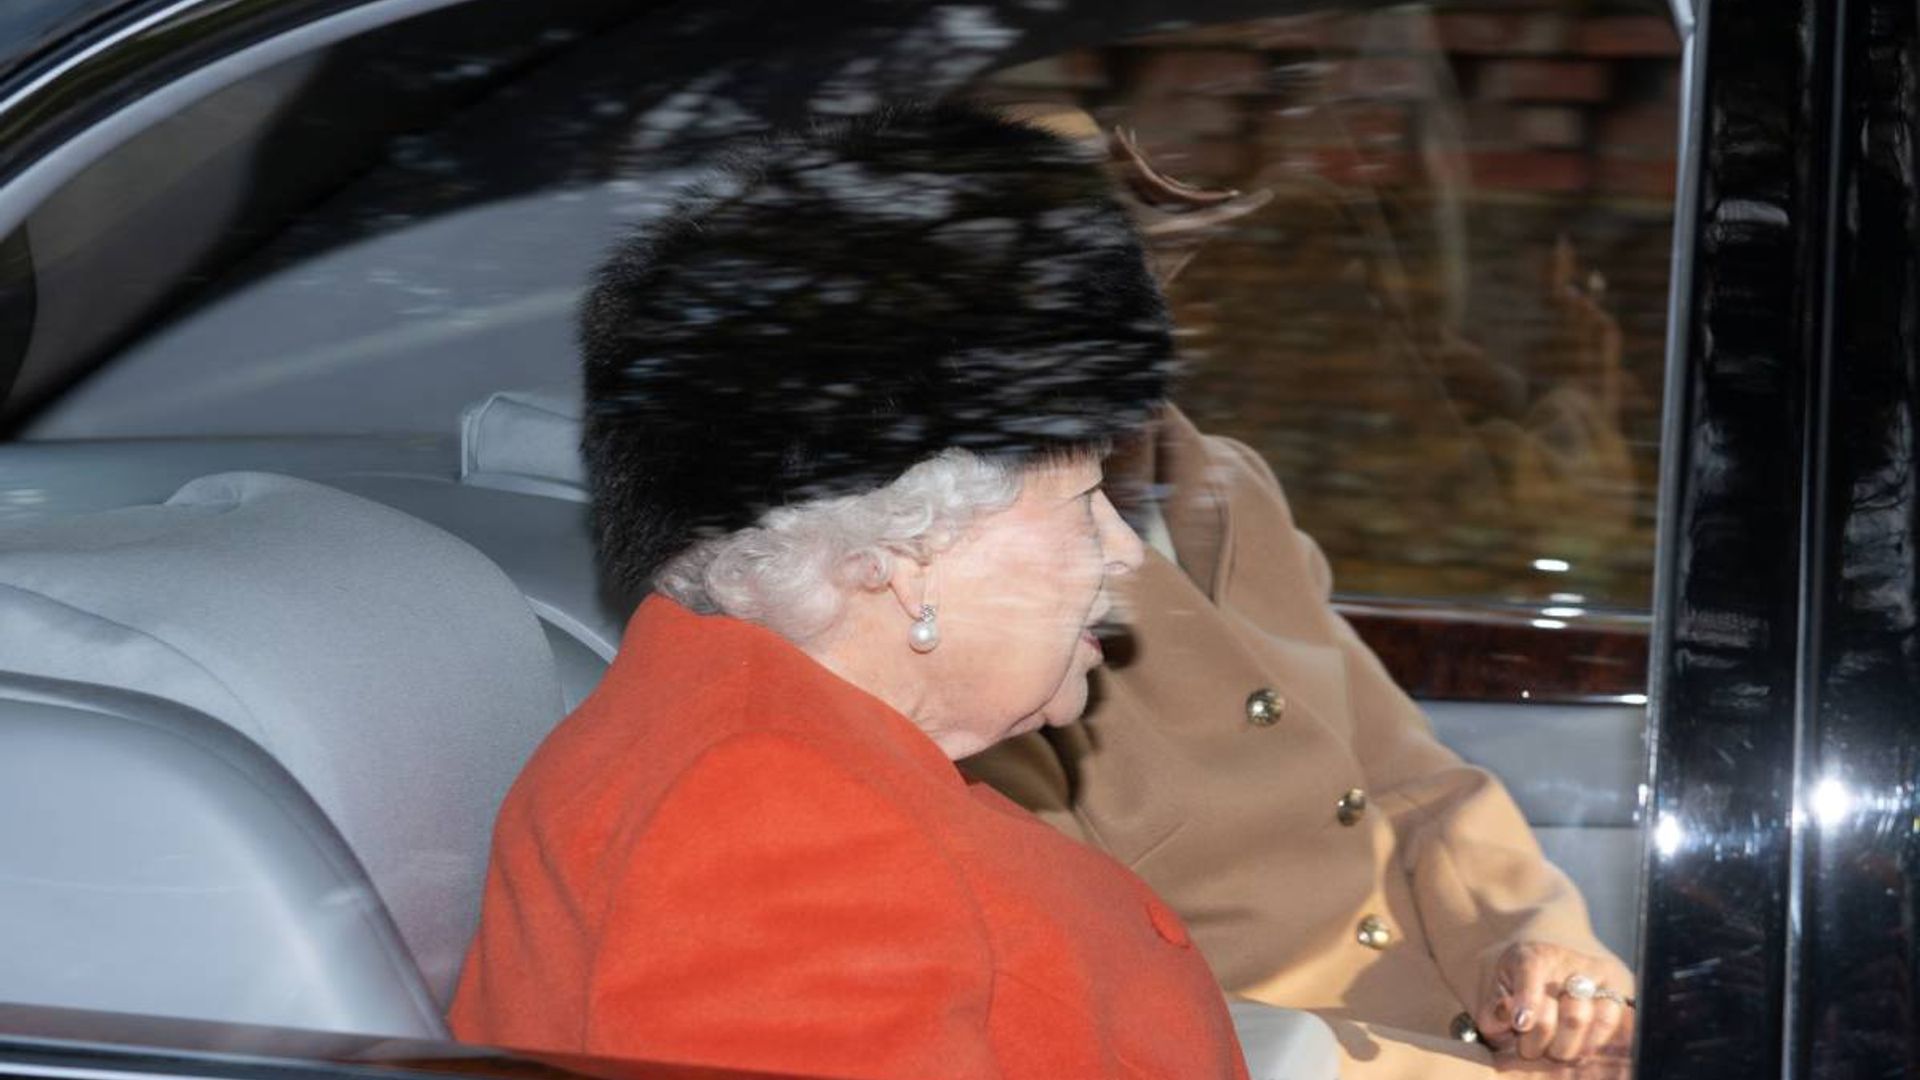 The Queen attends church with daughter Princess Anne following ill health last week